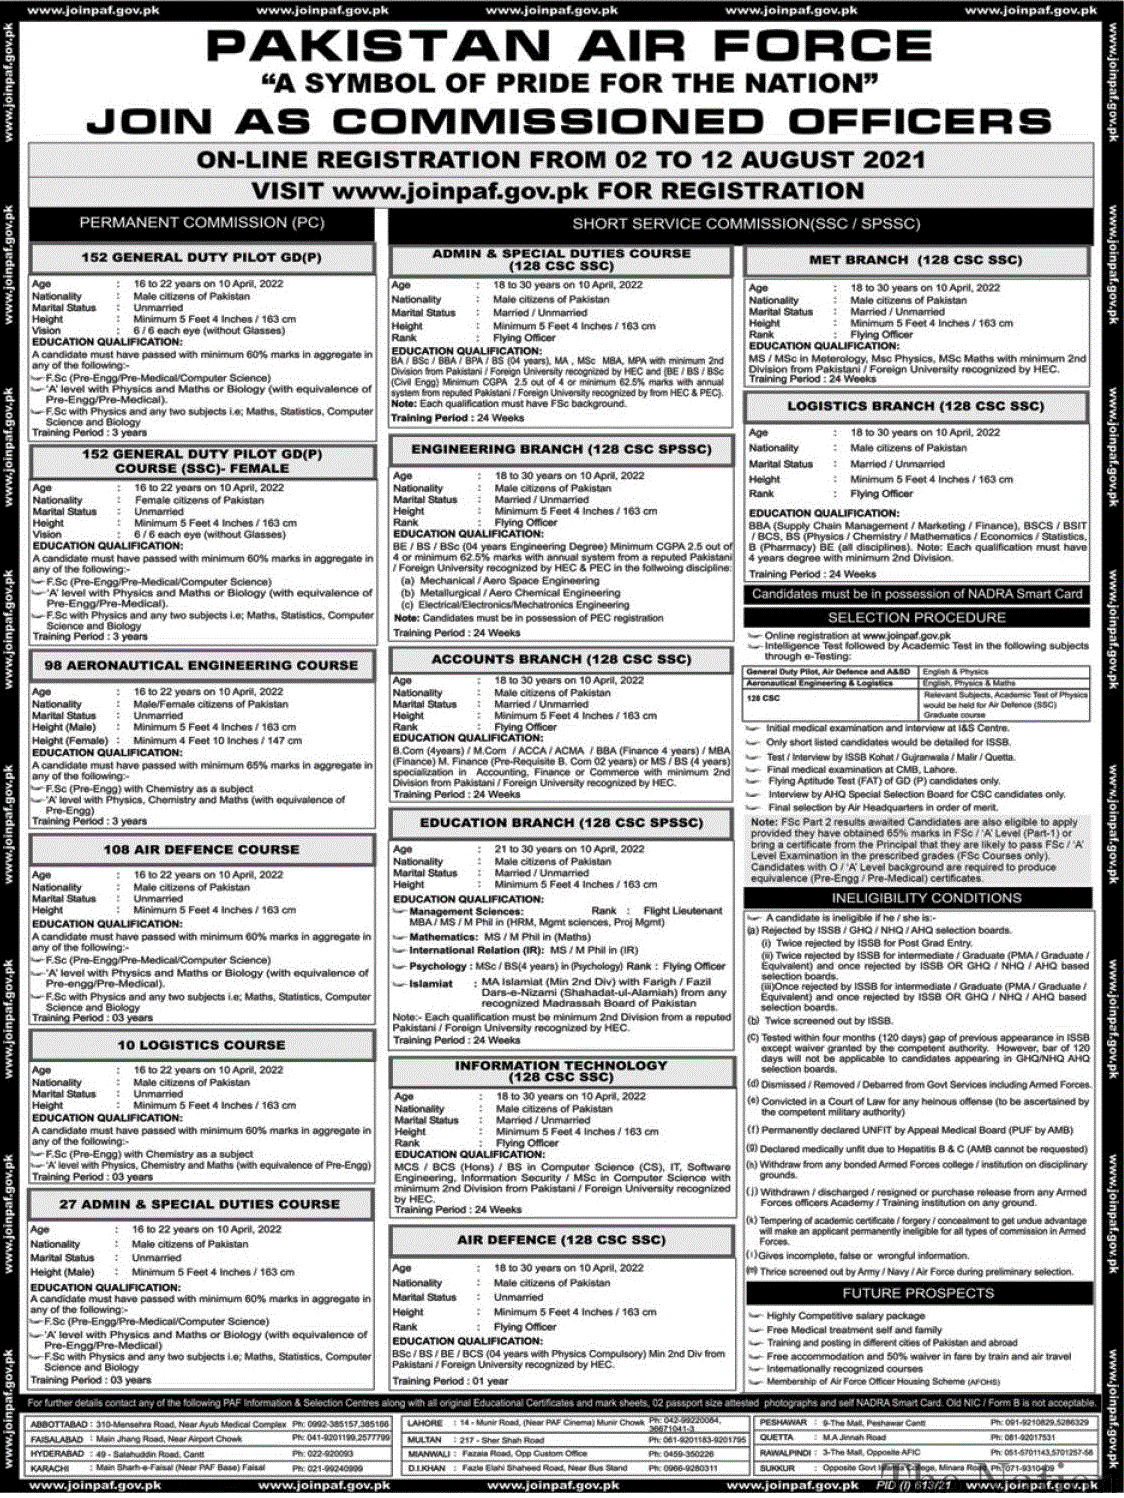 Join Pakistan Air Force as Commissioned Officer